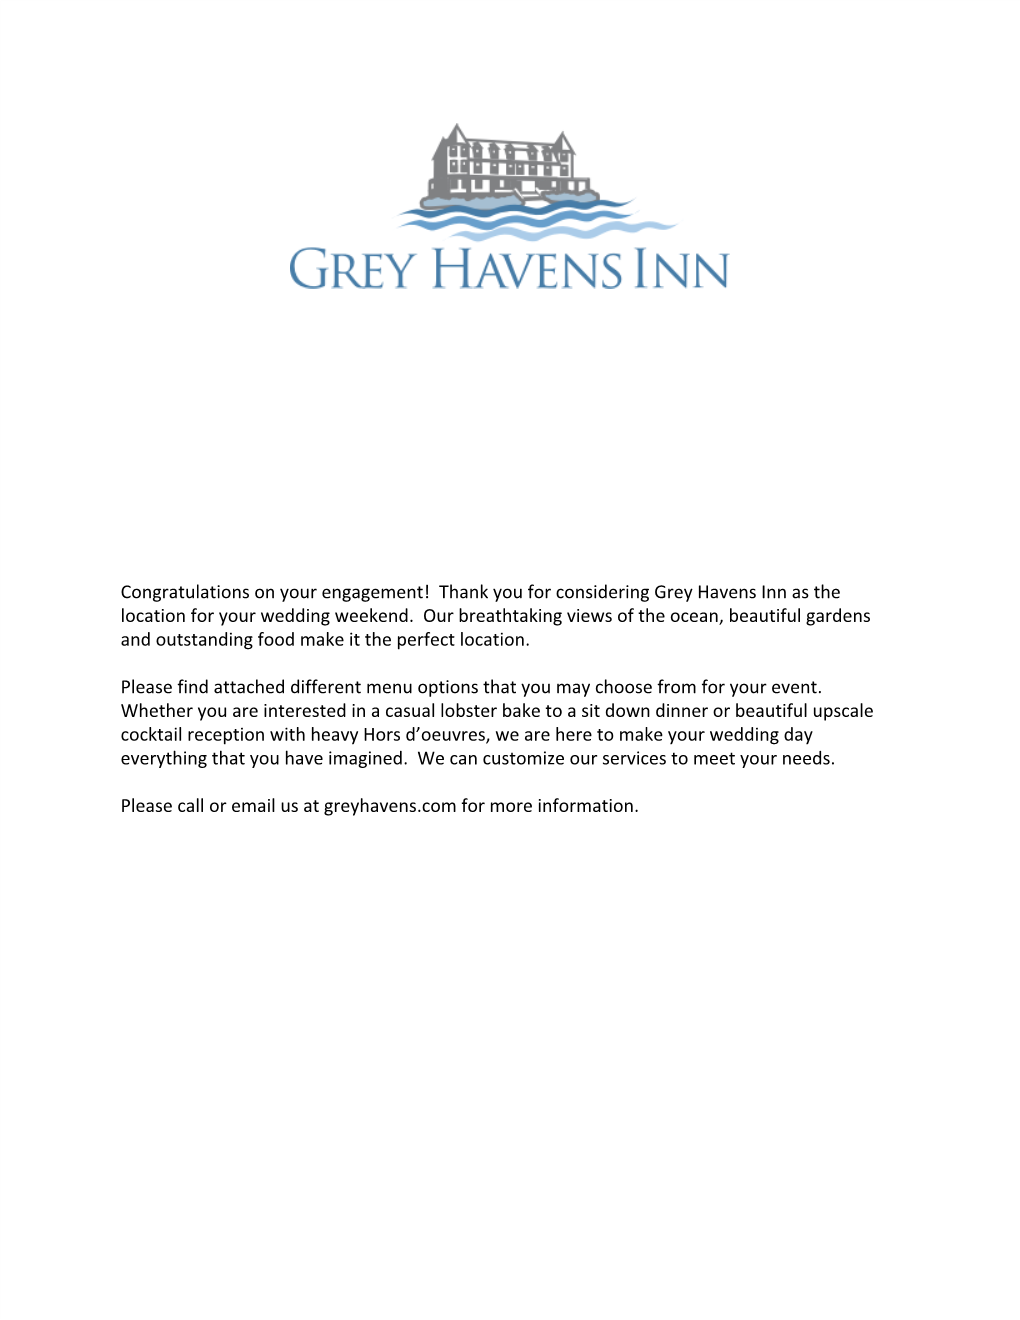 Congratulations on Your Engagement! Thank You for Considering Grey Havens Inn As the Location for Your Wedding Weekend